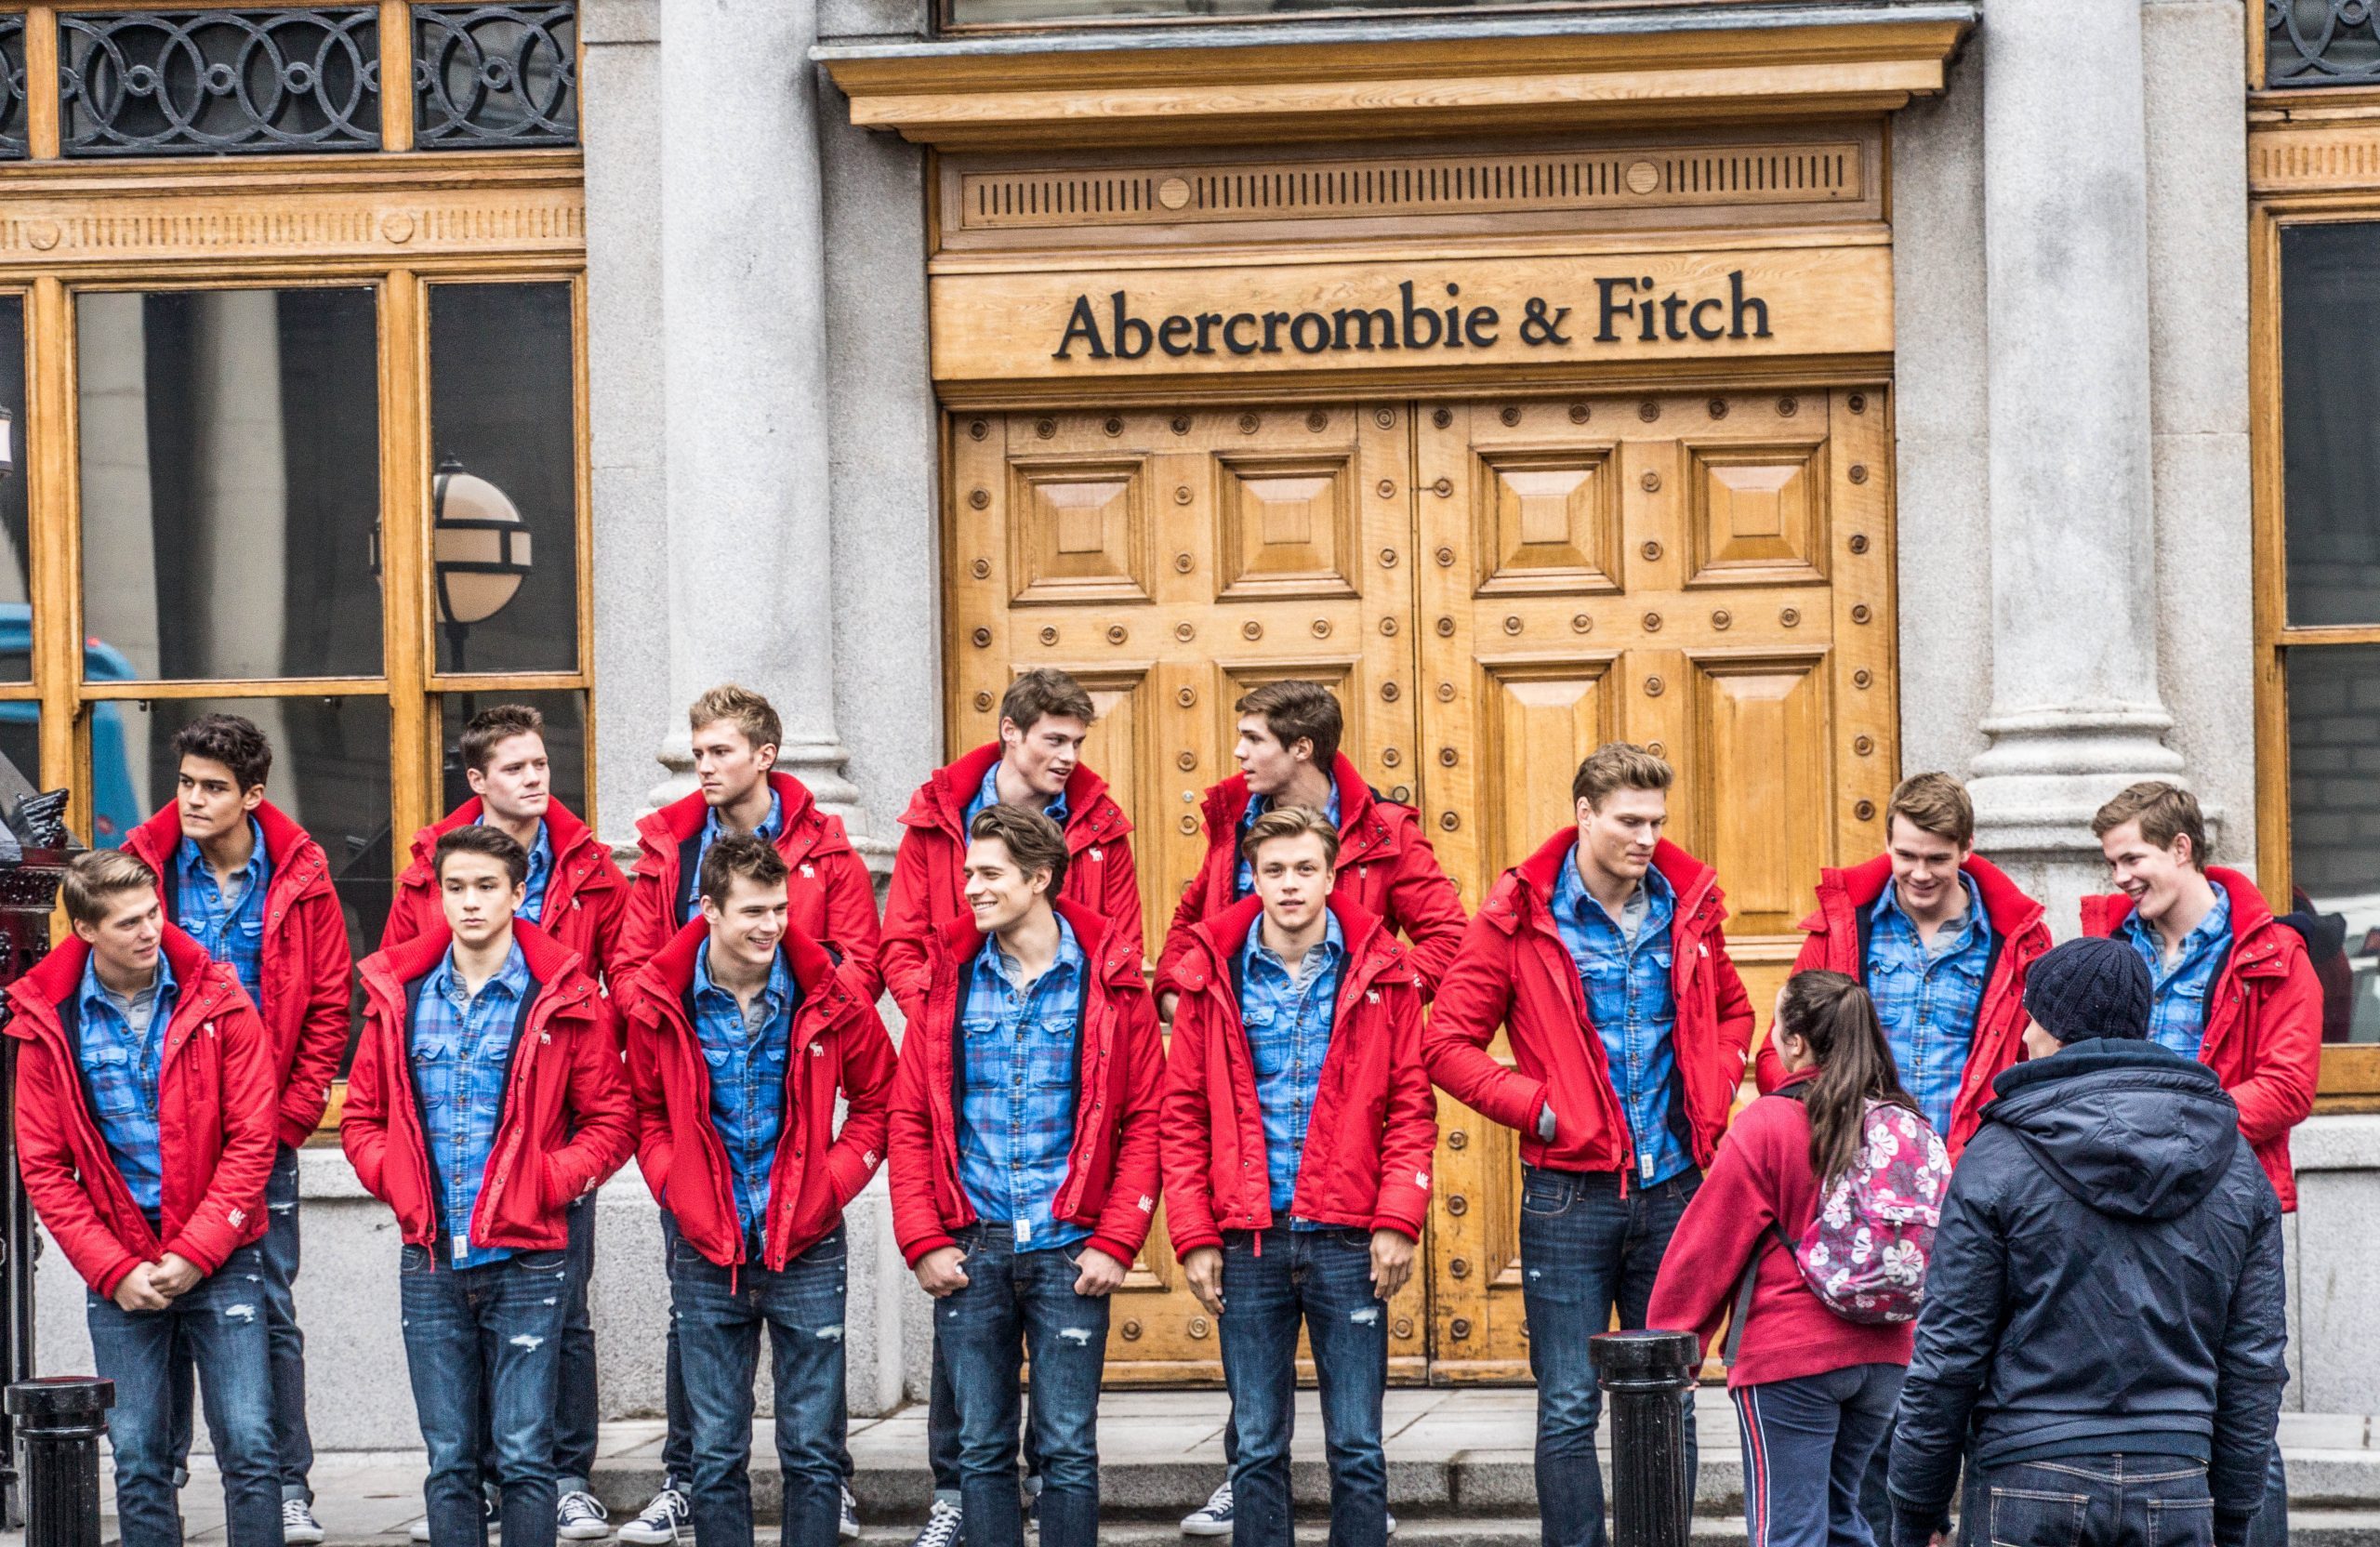 Two lines of 13 white male models, wearing the same outfit: jeans, a blue button down shirt, and a red sweater. They are standing in front of the doors of an Abercrombie and Fitch store.